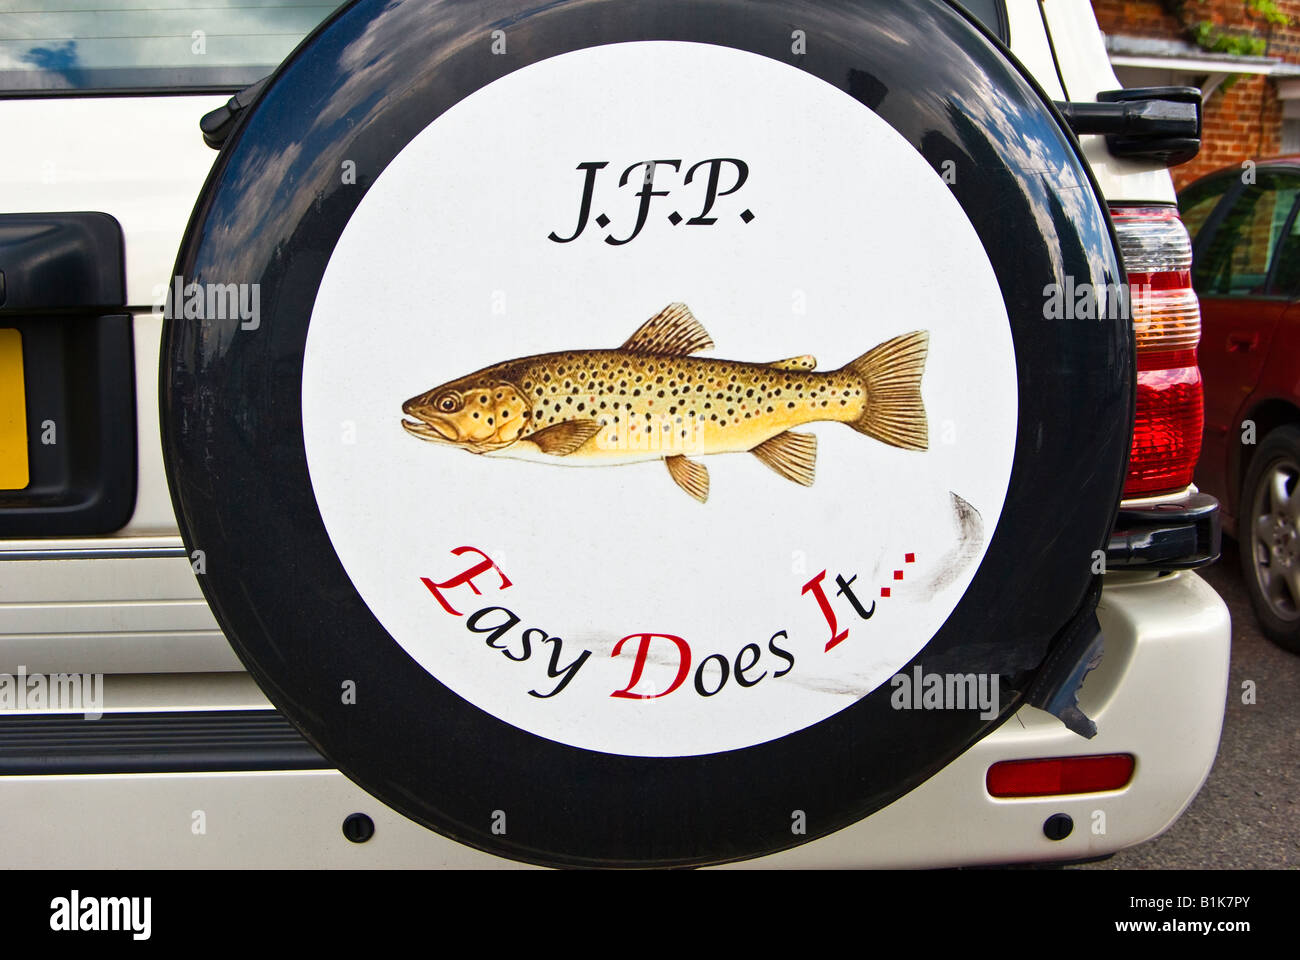 Picture of a trout fish on a spare wheel cover on a car parked Stock Photo  - Alamy